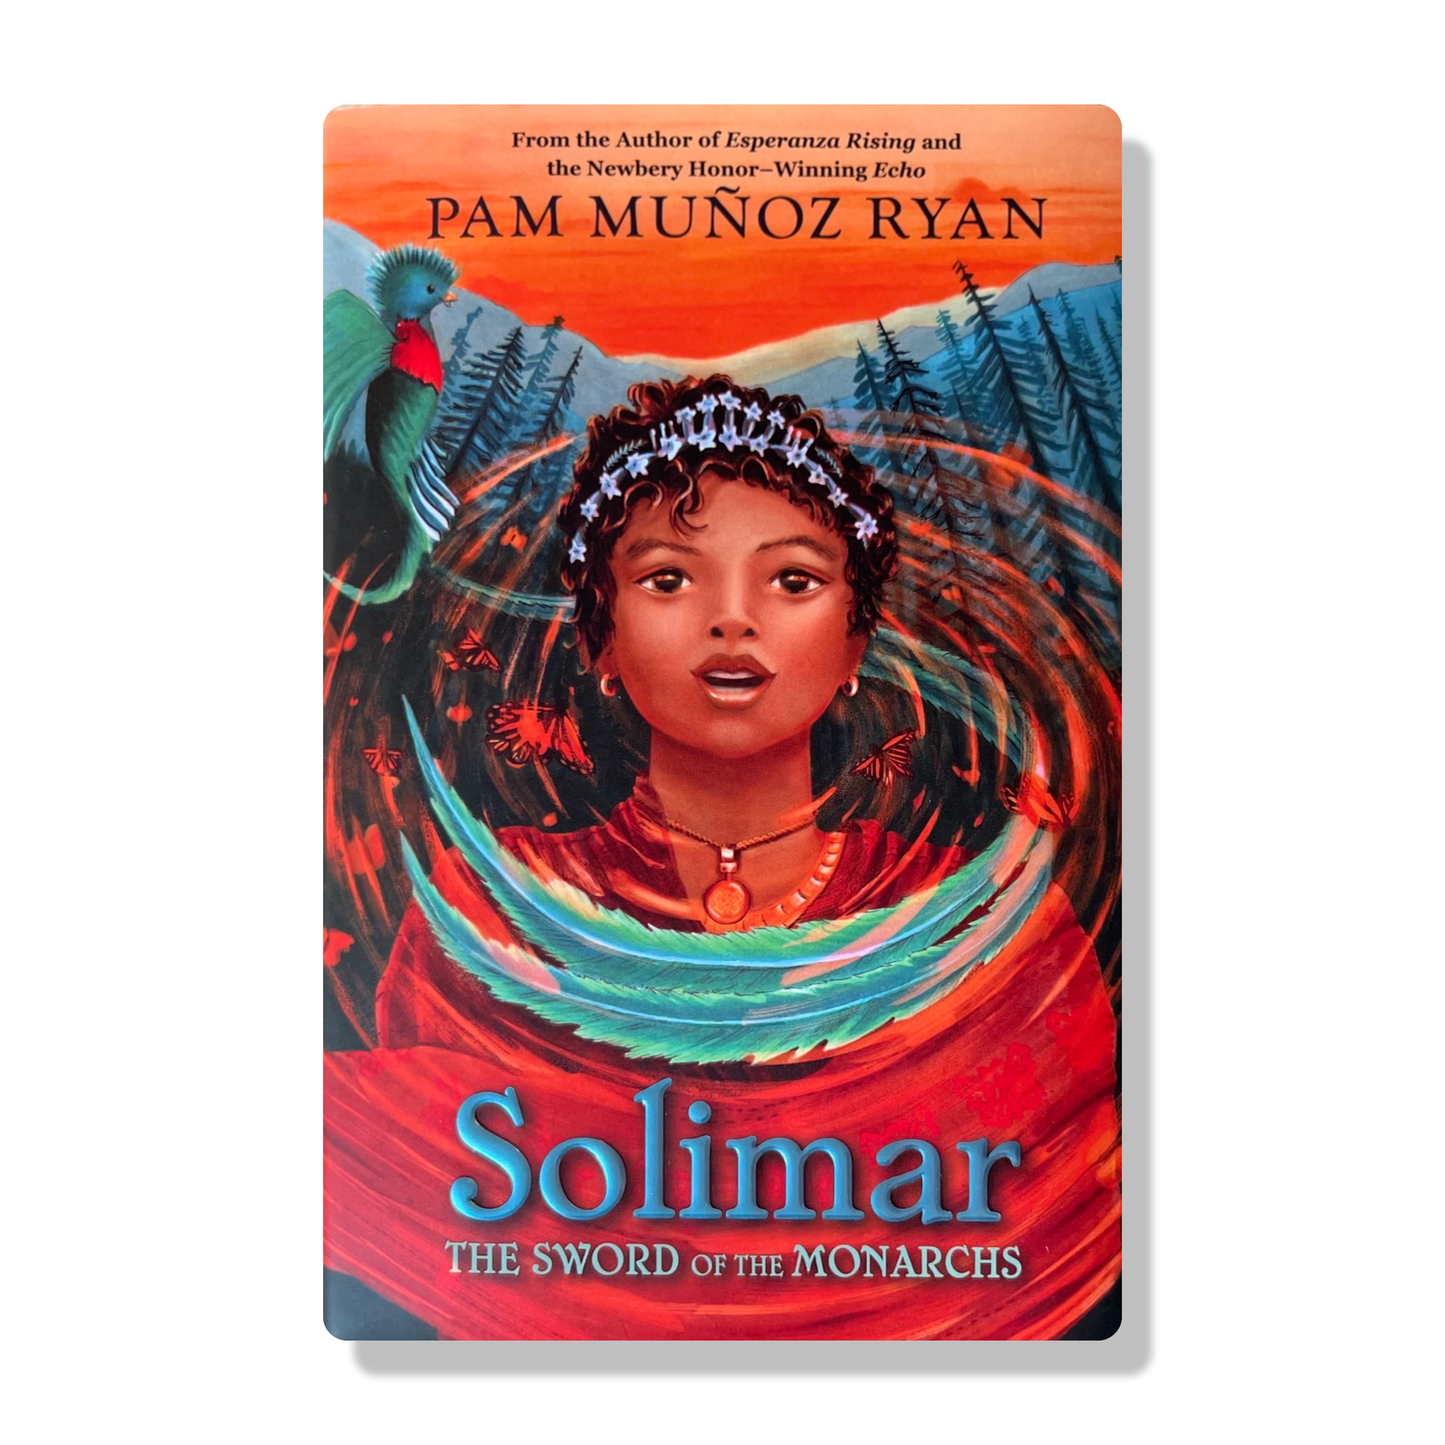 Solimar: The Sword of the Monarchs by Pam Muñoz Ryan